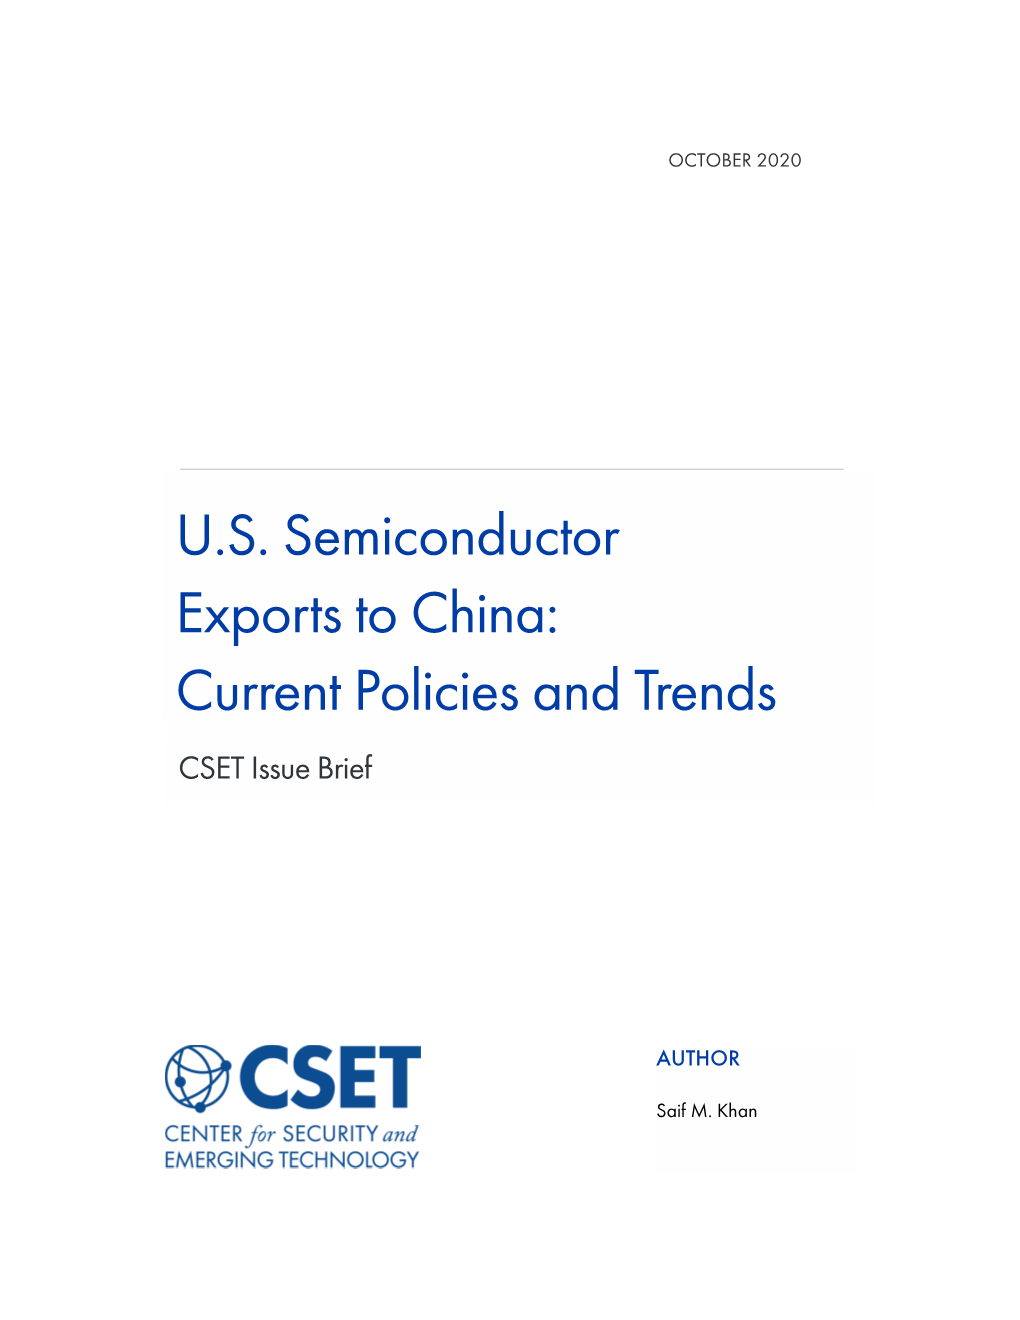 US Semiconductor Exports to China: Current Policies and Trends